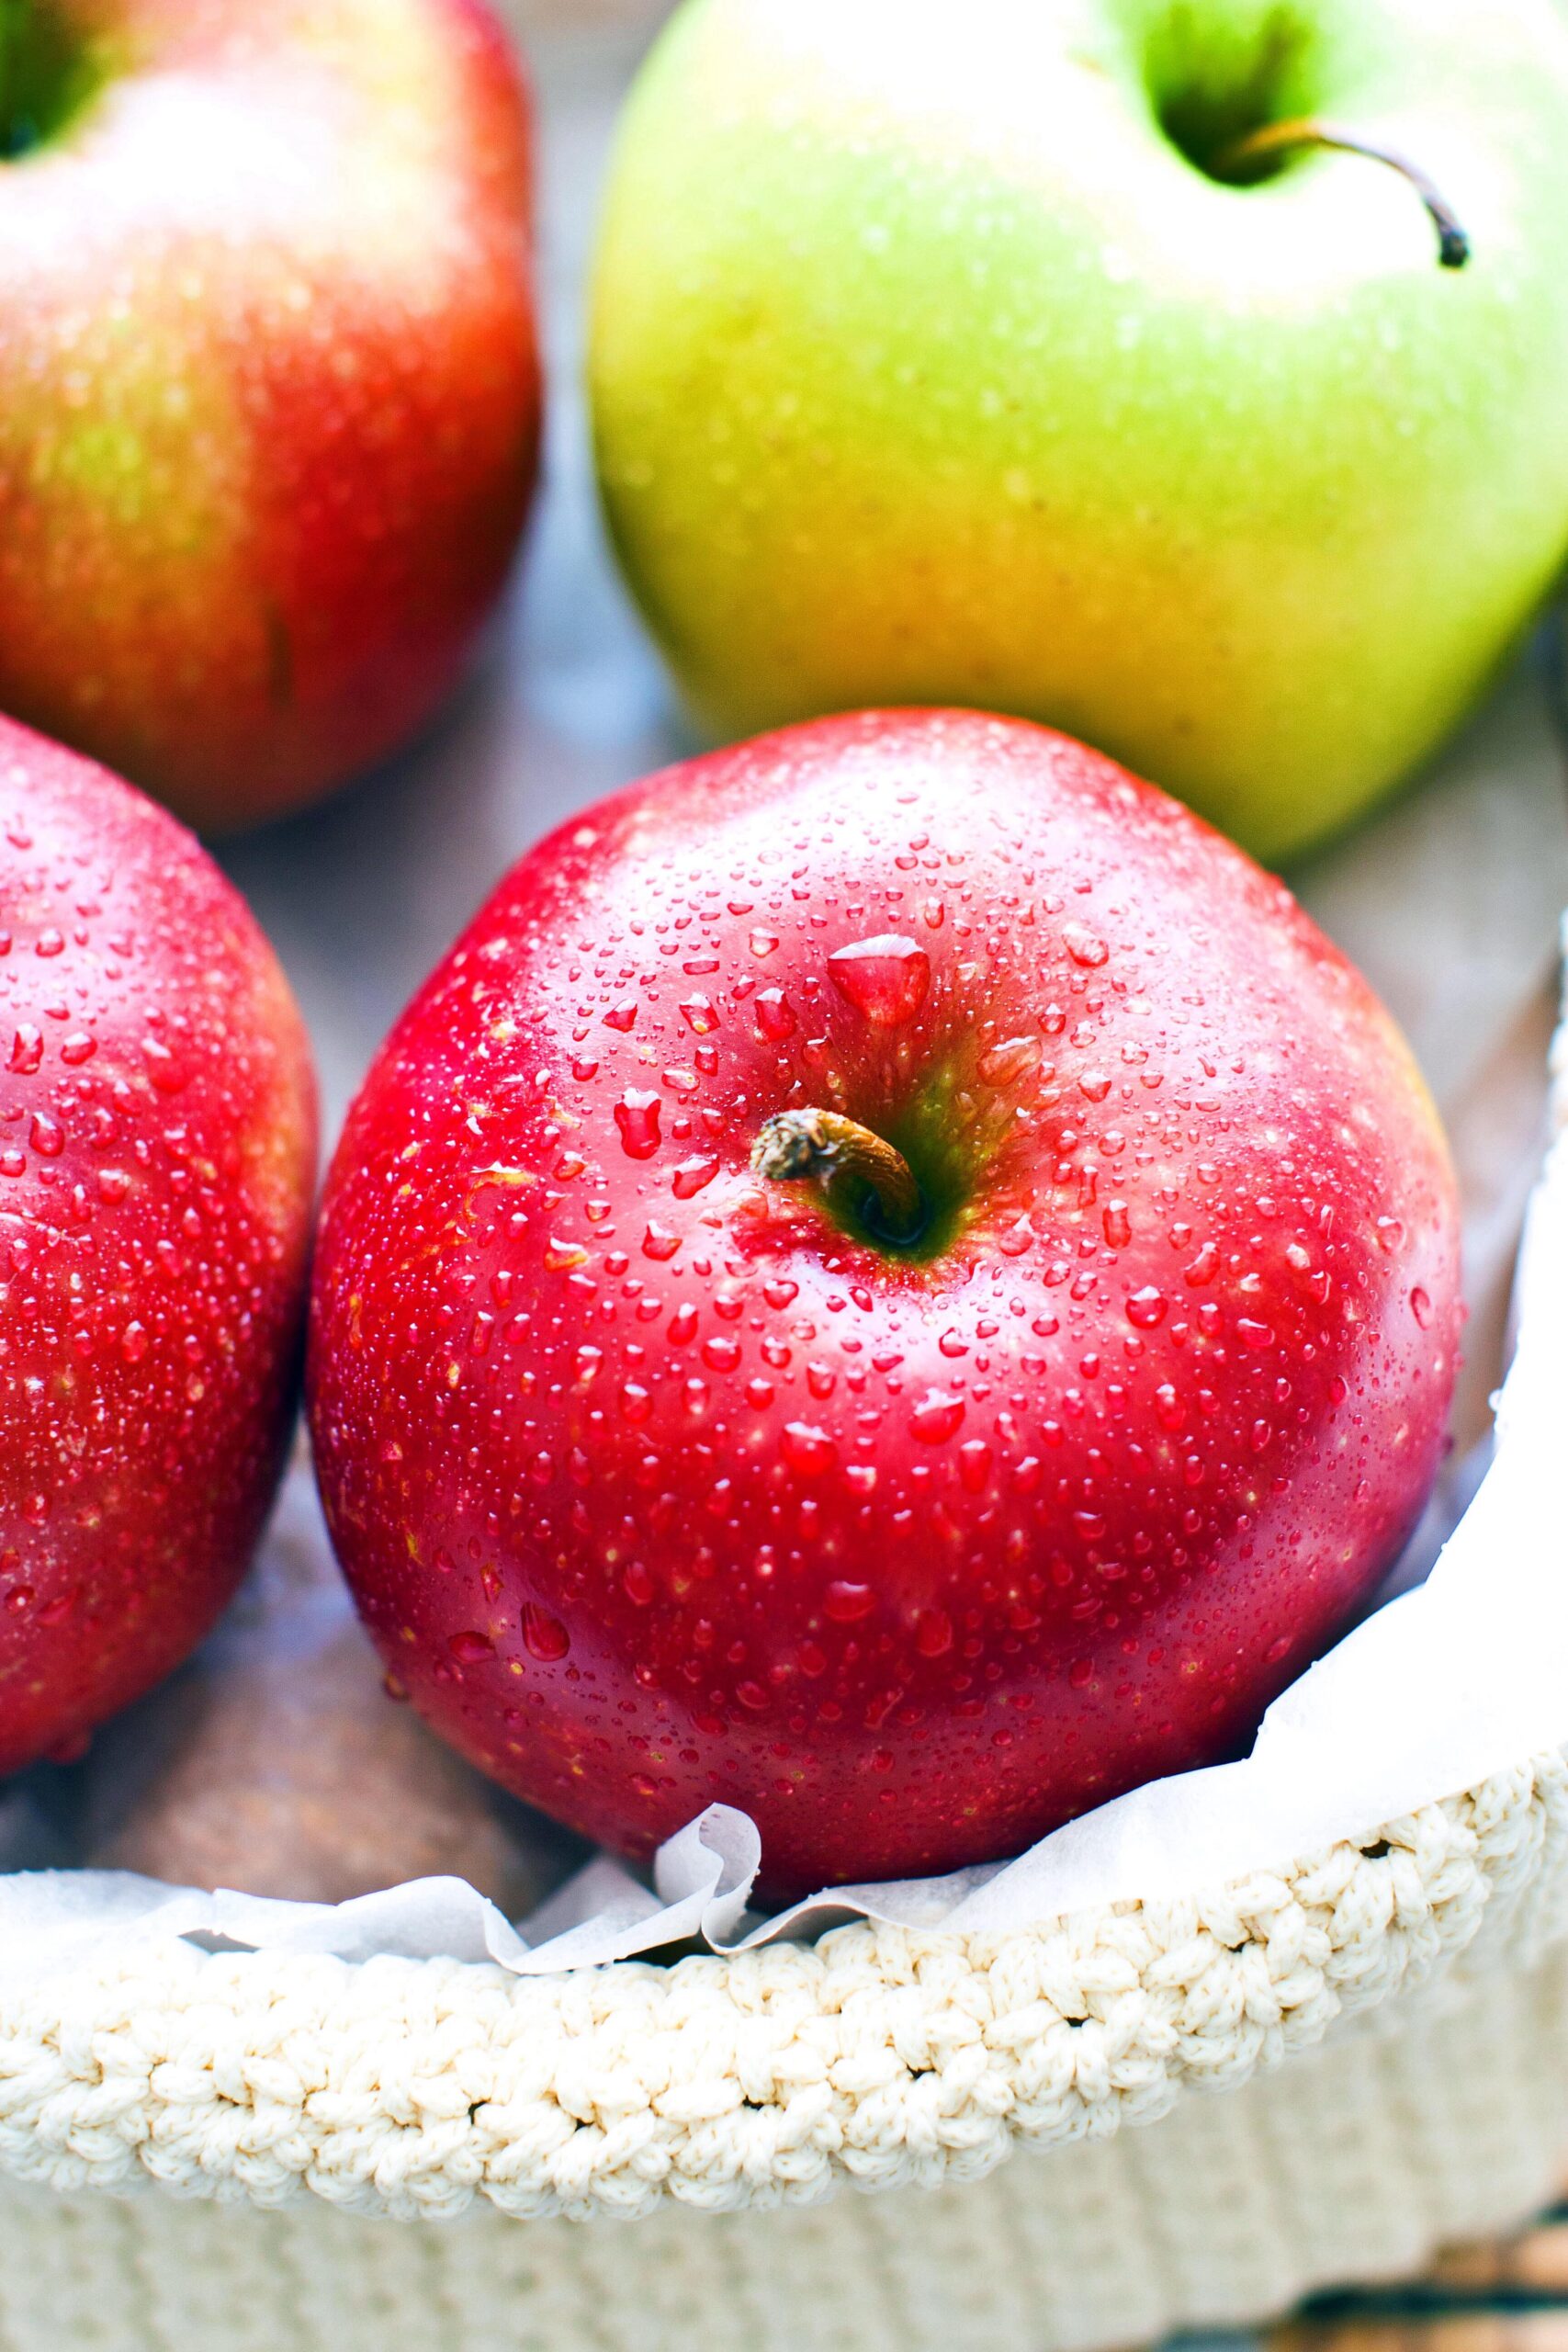 The Health Benefits of Apples